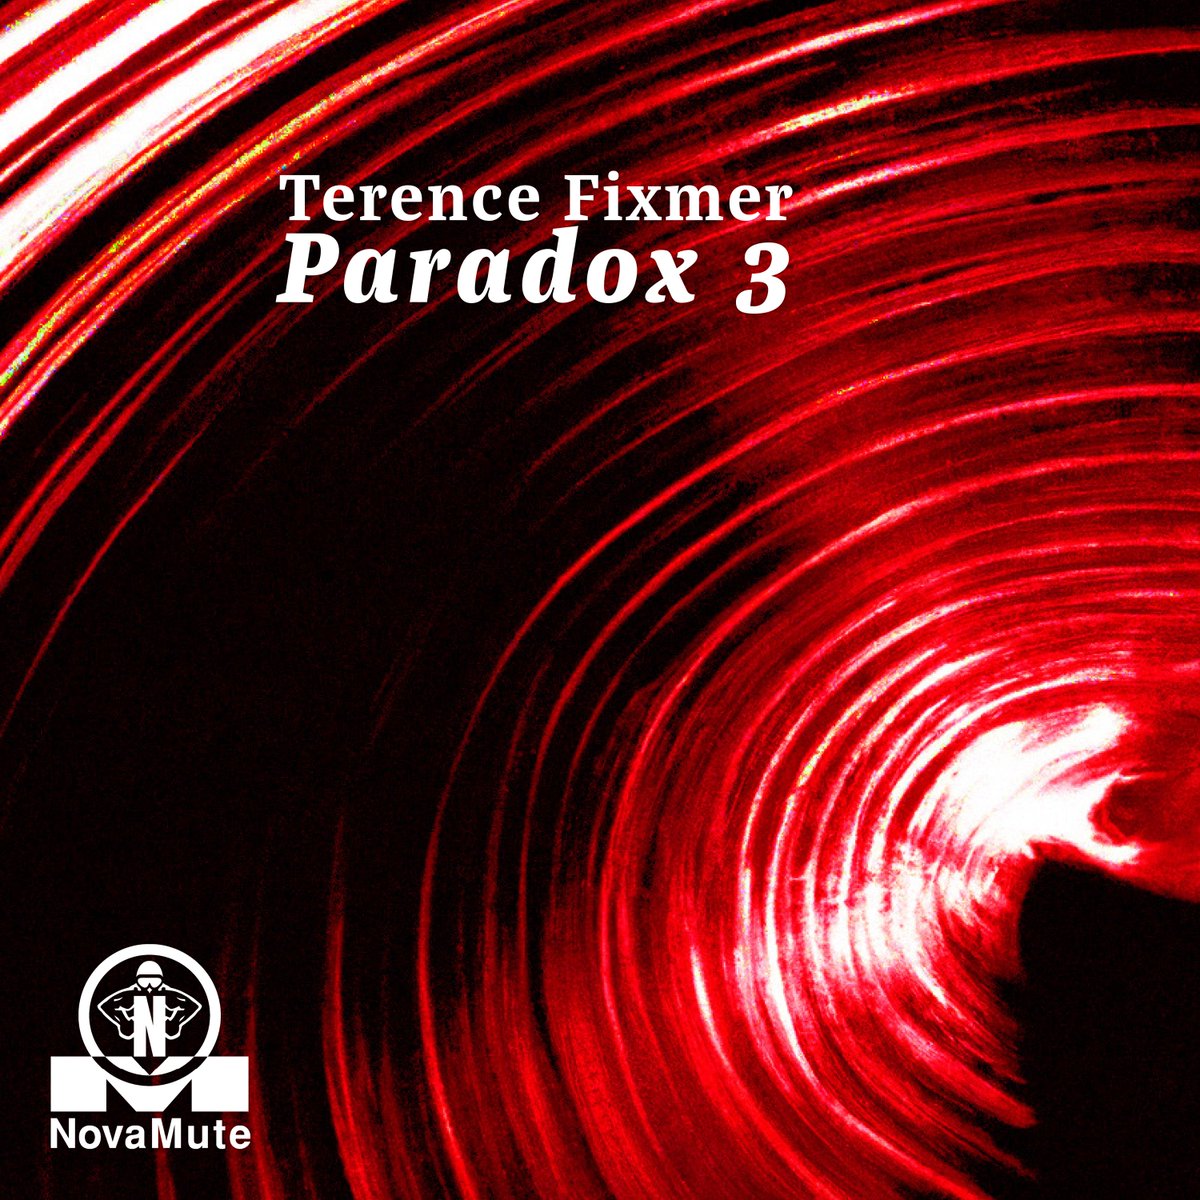 Paradox 3 by @terencefixmer — out now on selected specialist platforms. Includes tracks 'Another End' and 'Close to You'. 🎧 mute.ffm.to/terencefixmer-…